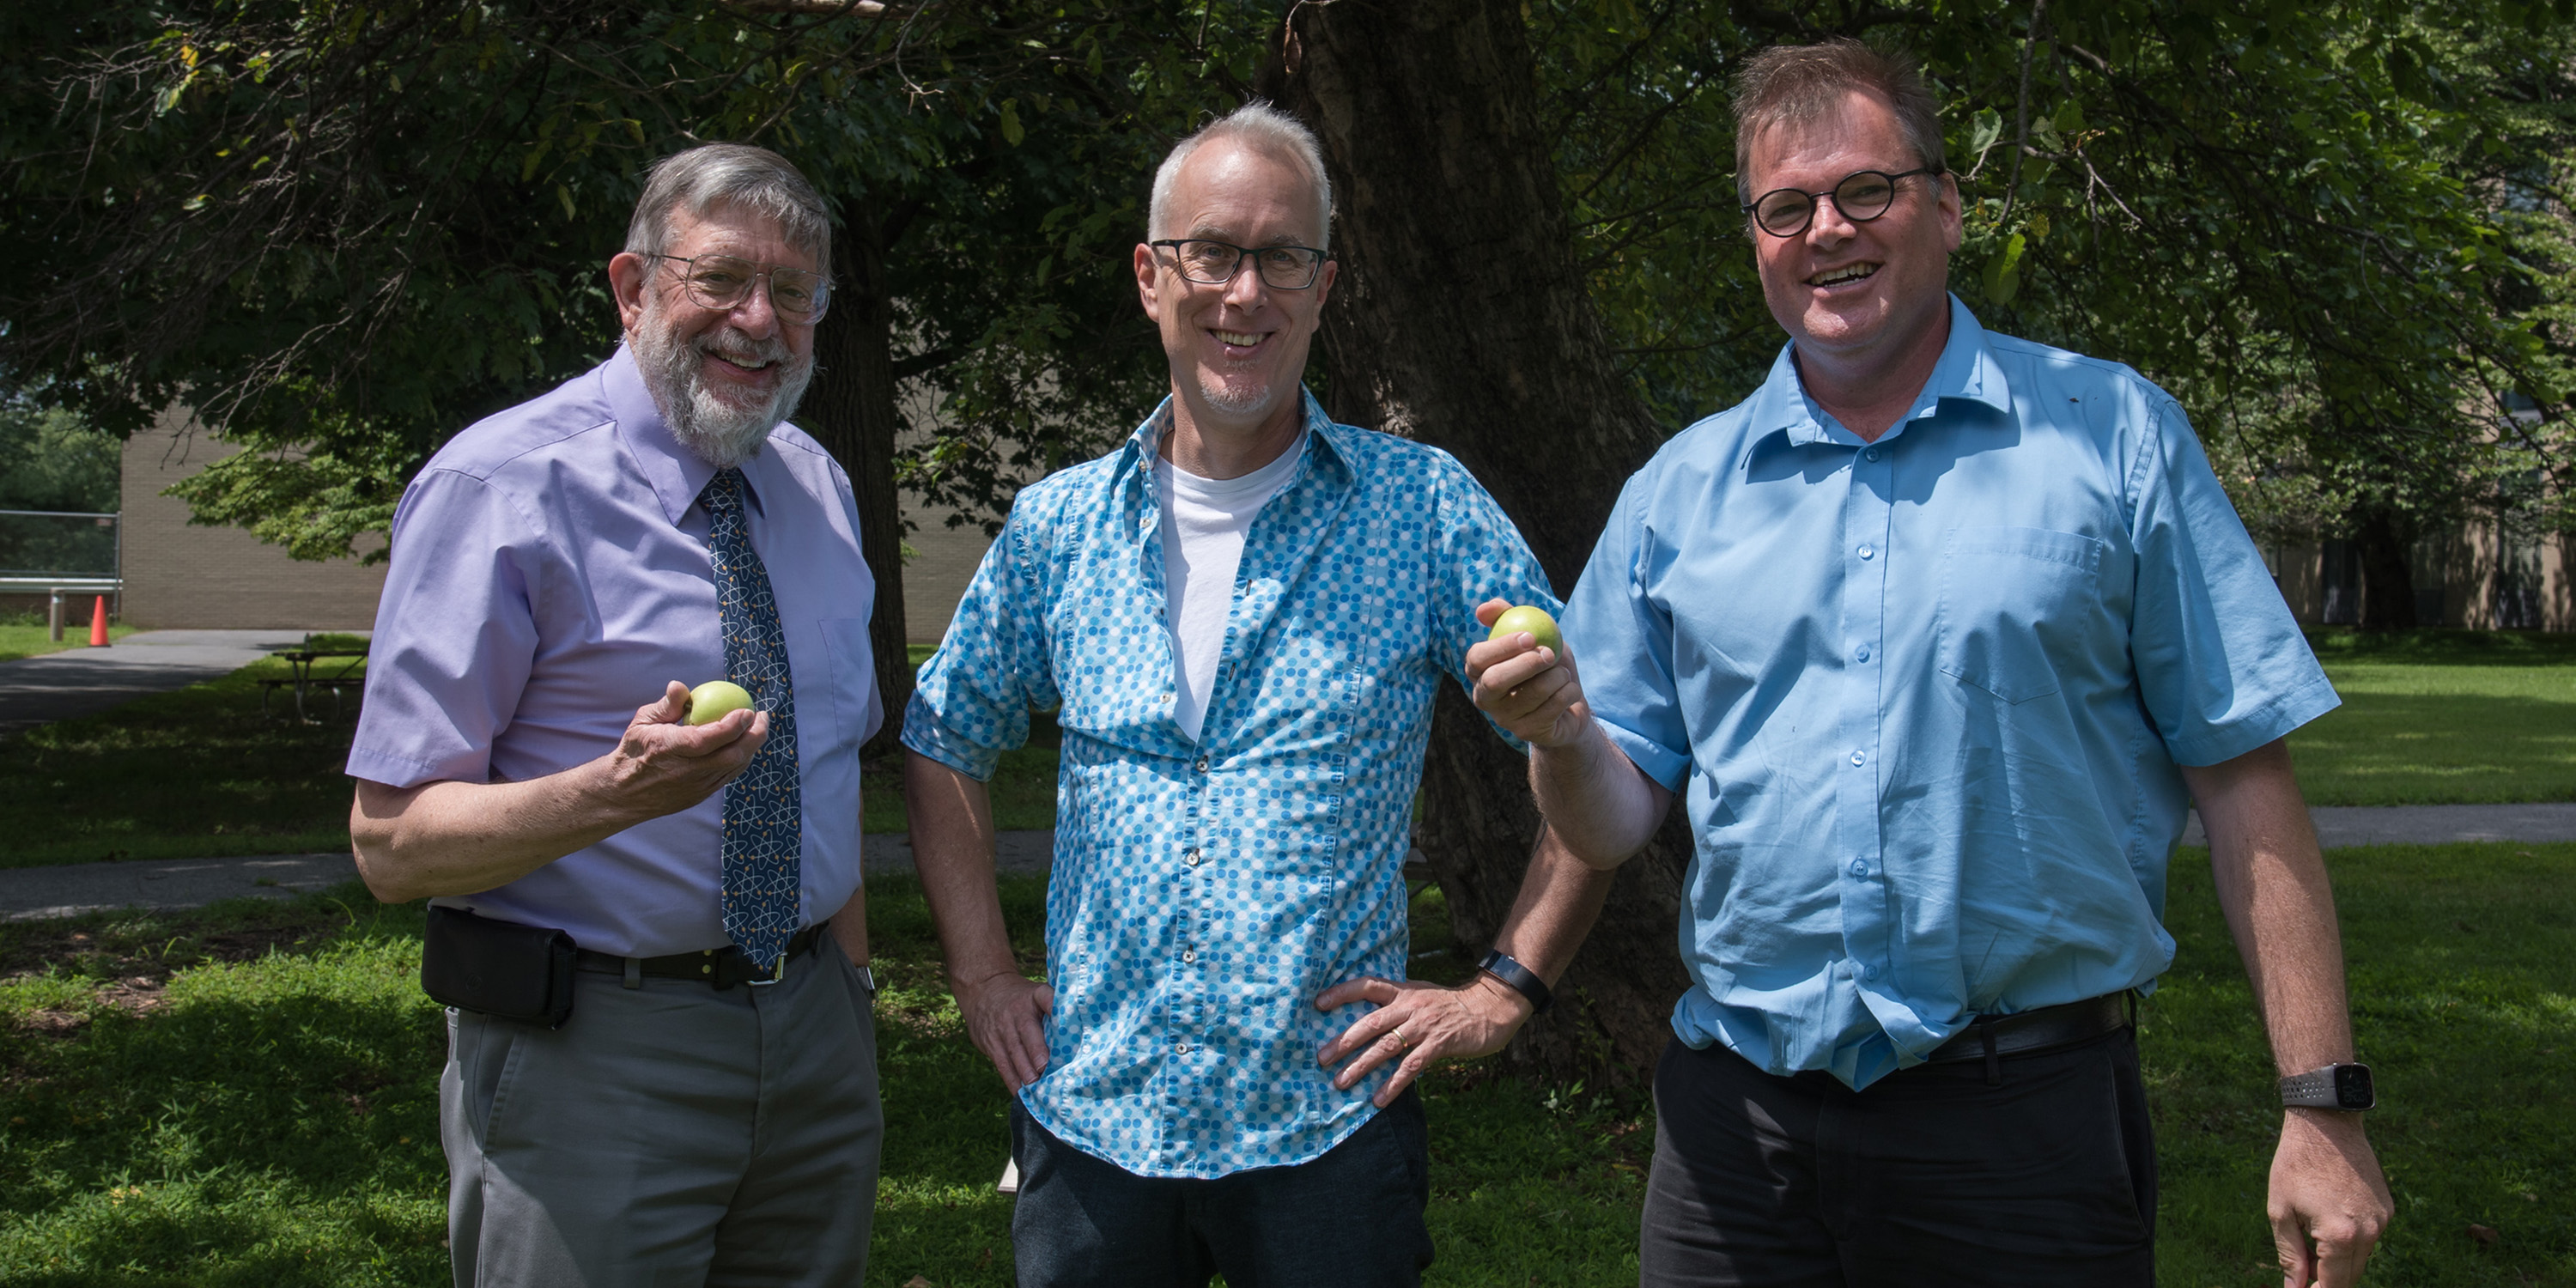 Bill Phillips, Jon Pratt and Stephan Schlamminger smile before the Newton apple tree on the NIST Gaithersburg campus. Bill and Stephan are holding small apples from the tree.